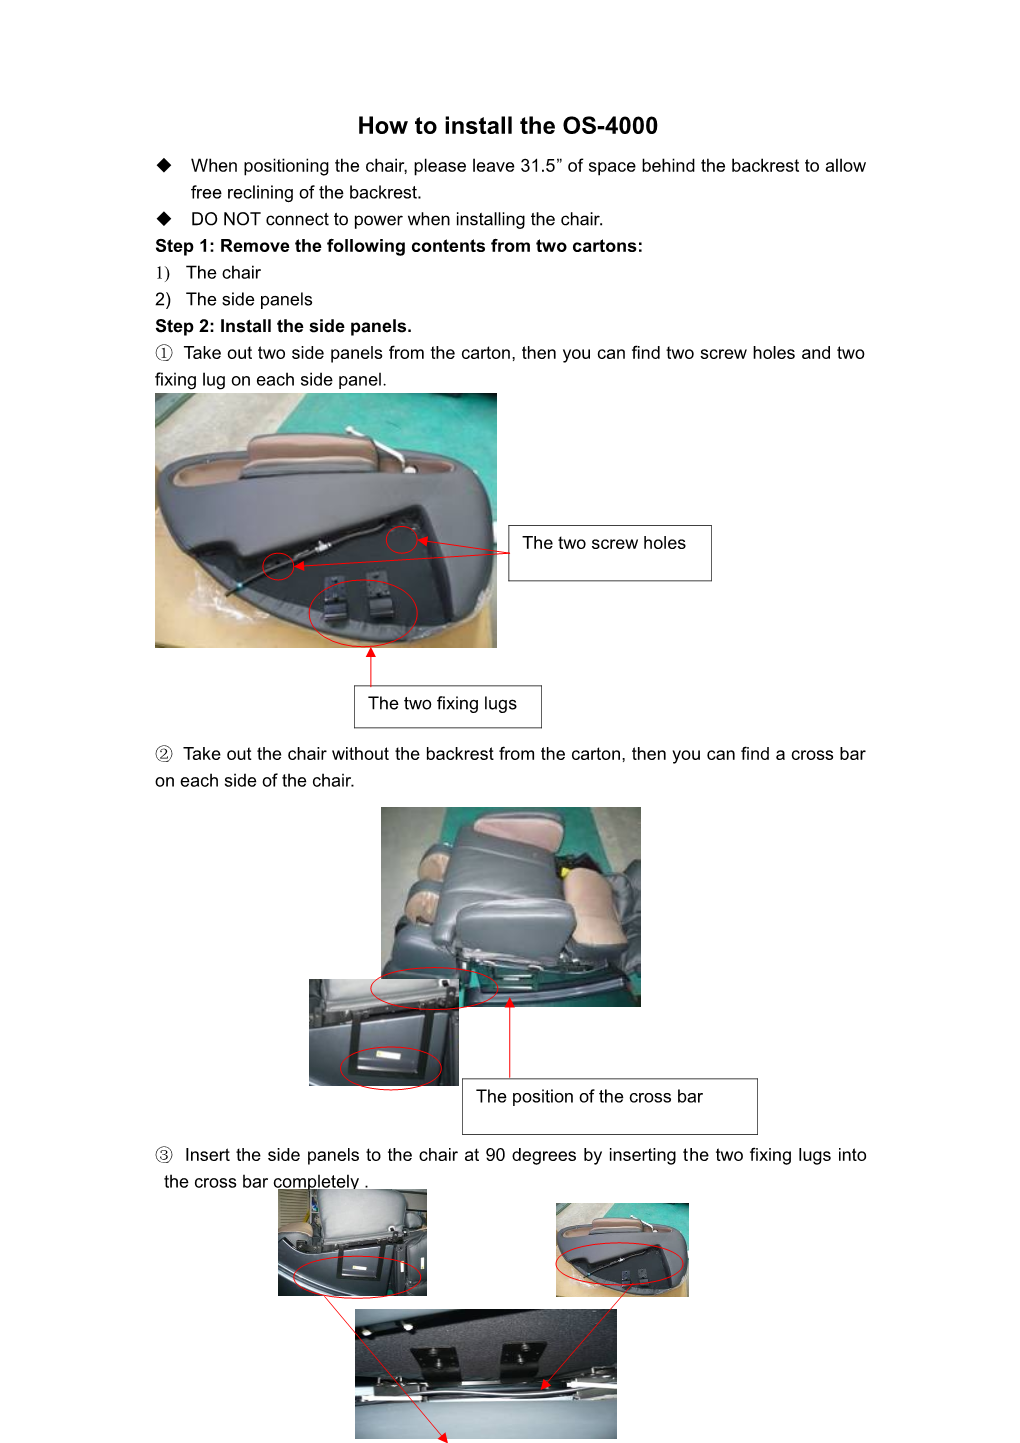 How to Install the EC-380B